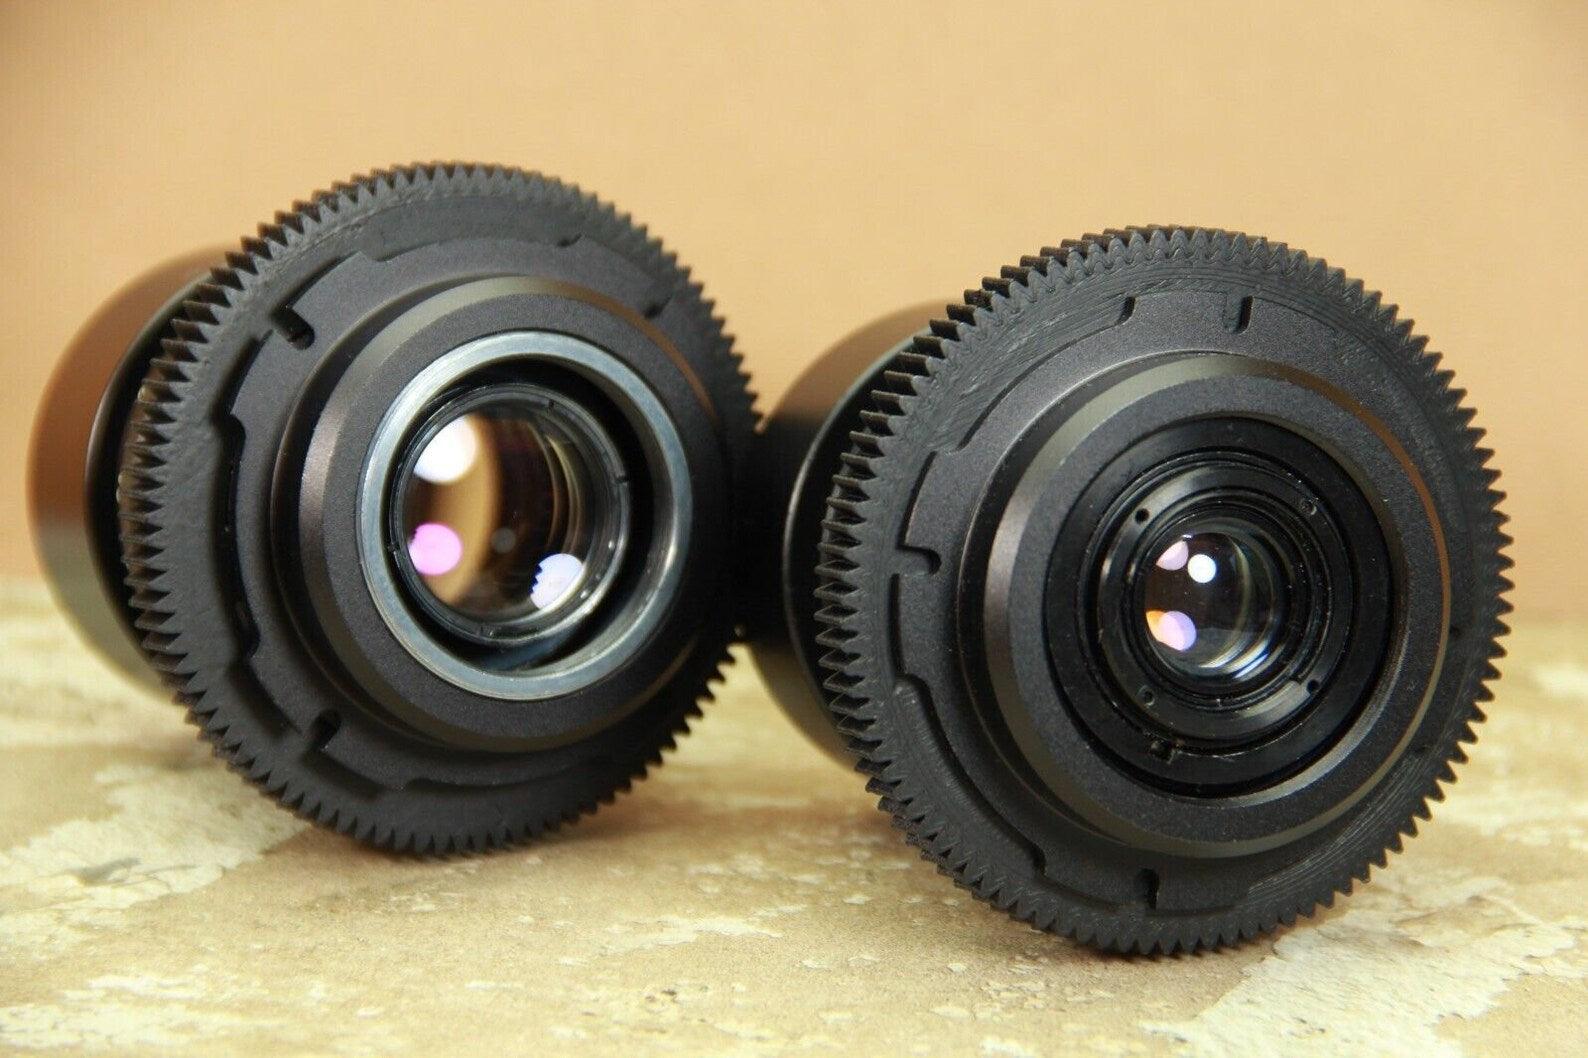 Two Soviet Lenses: Helios 44-2 58mm F/2 and Mir-1B F2.8/37mm DSLR with PL Adapter